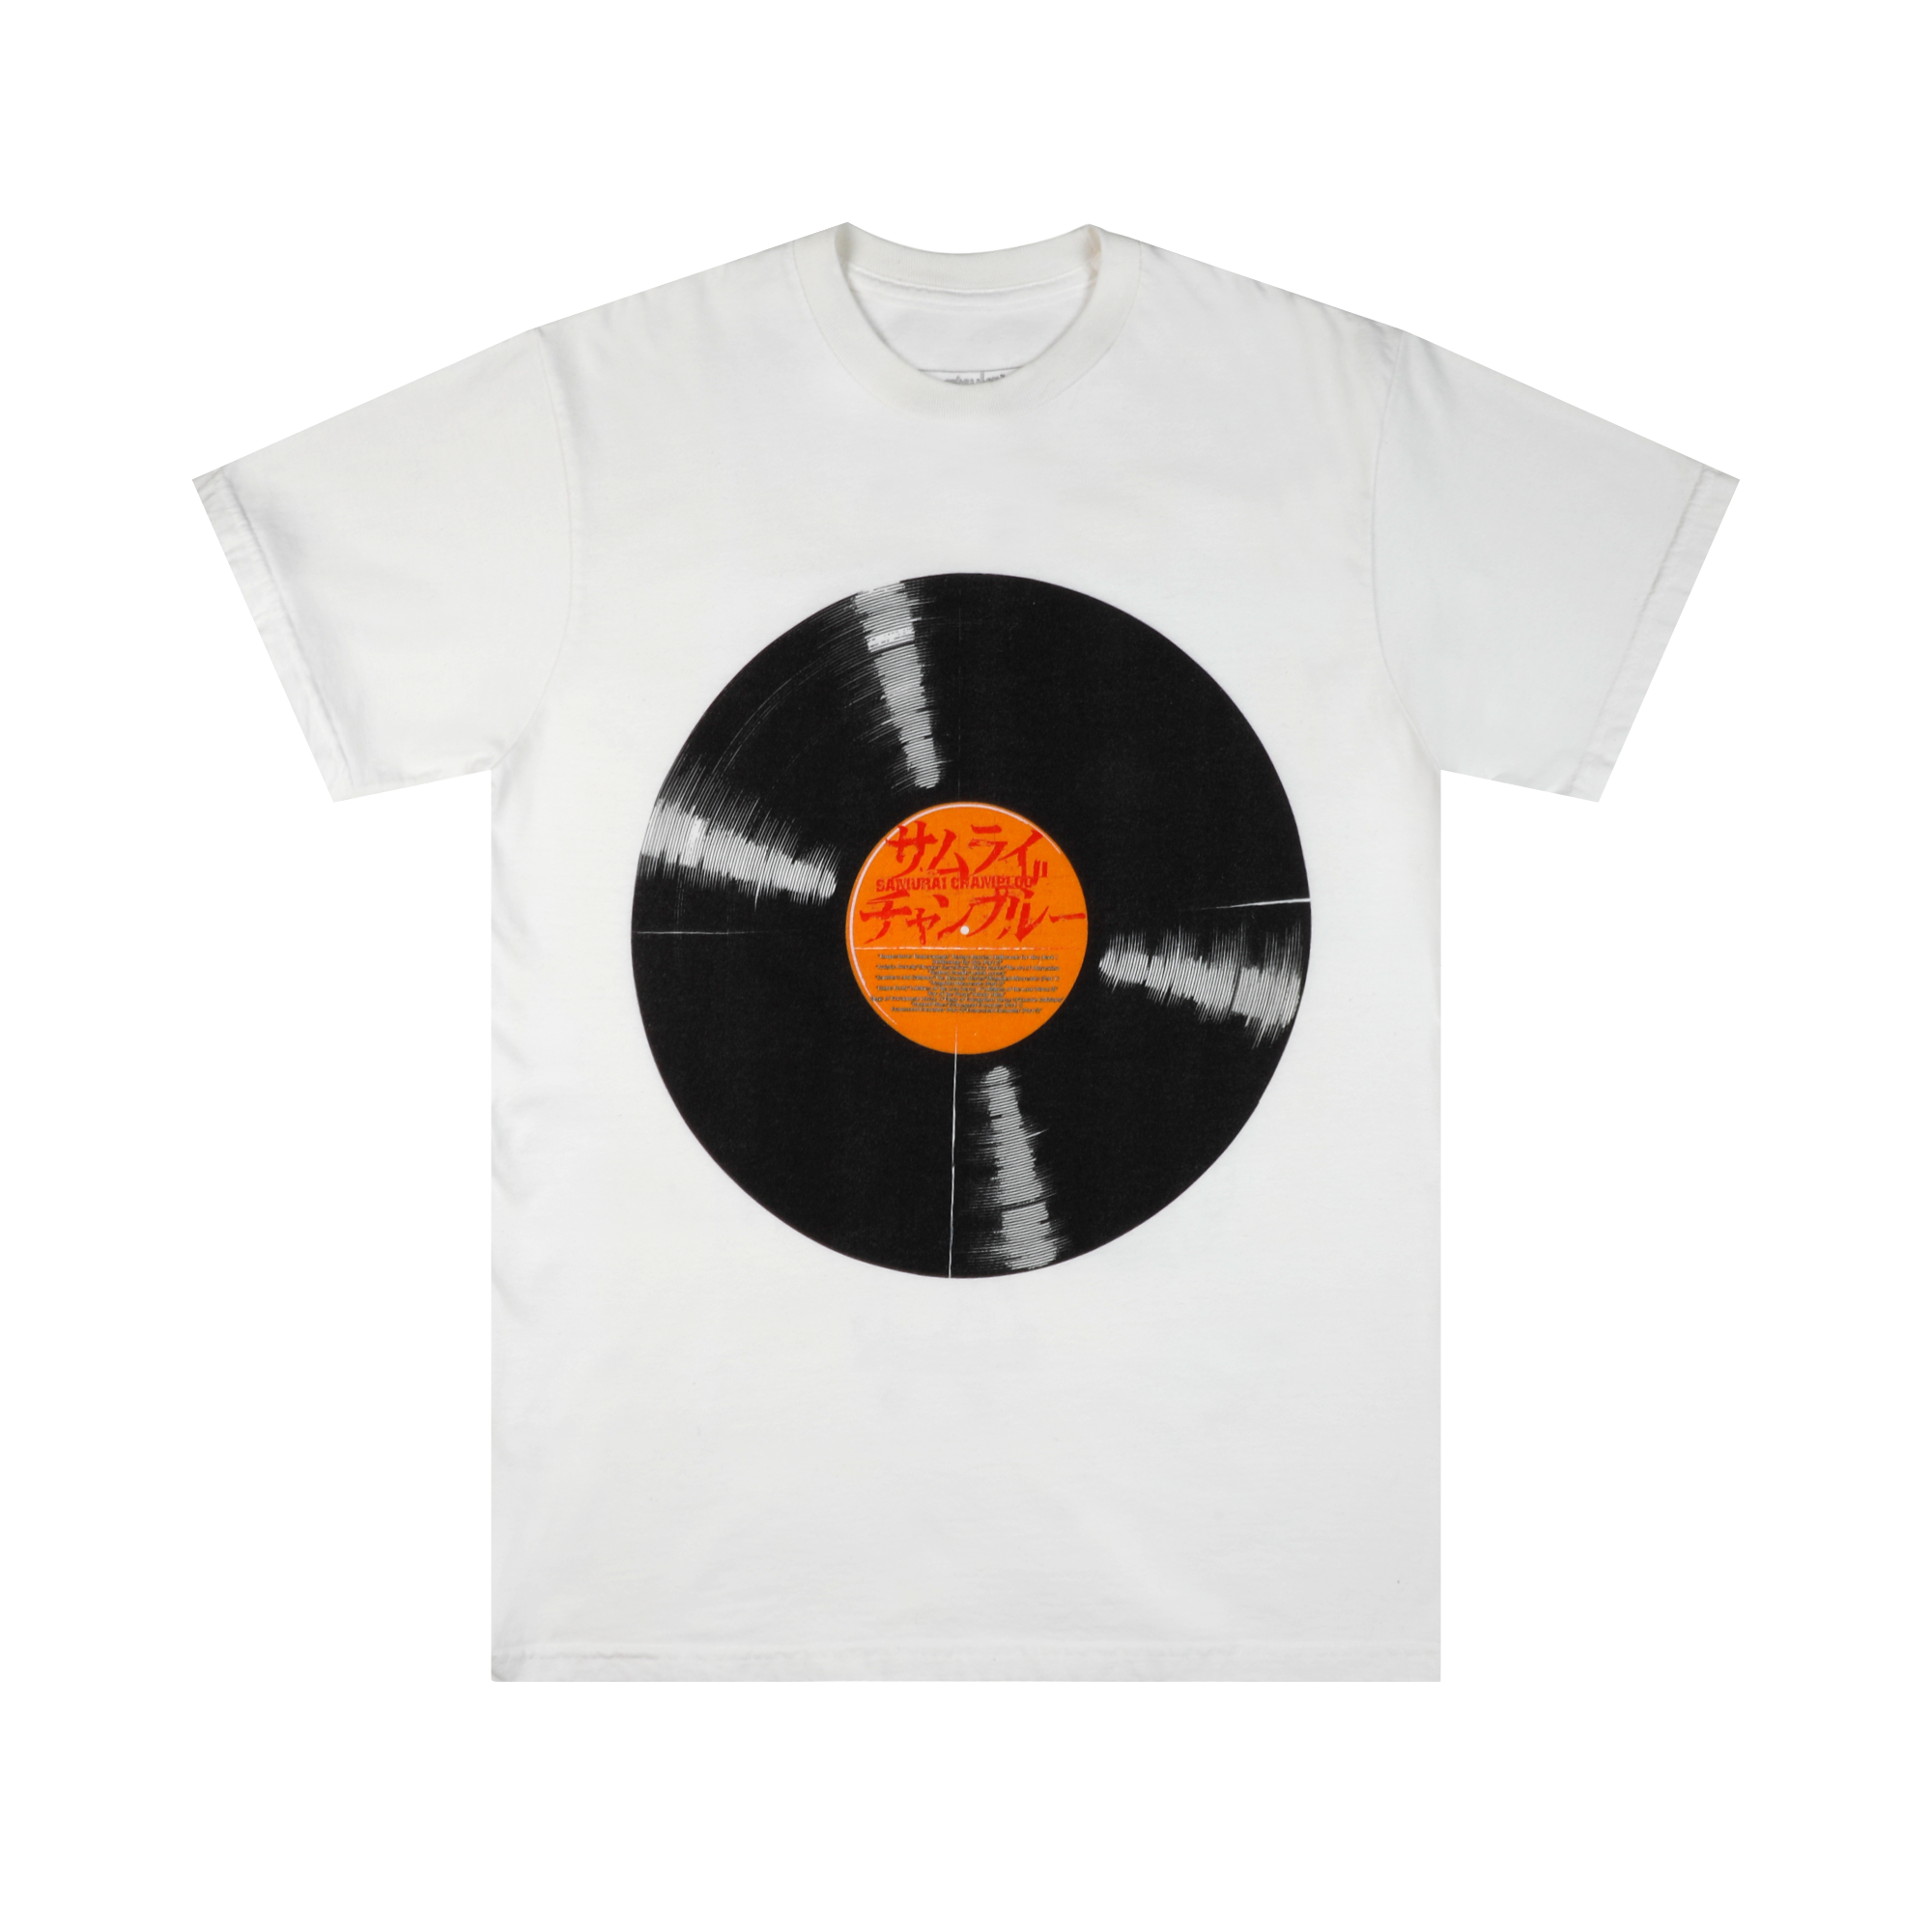 Soundtrack Of Outlaws White Tee